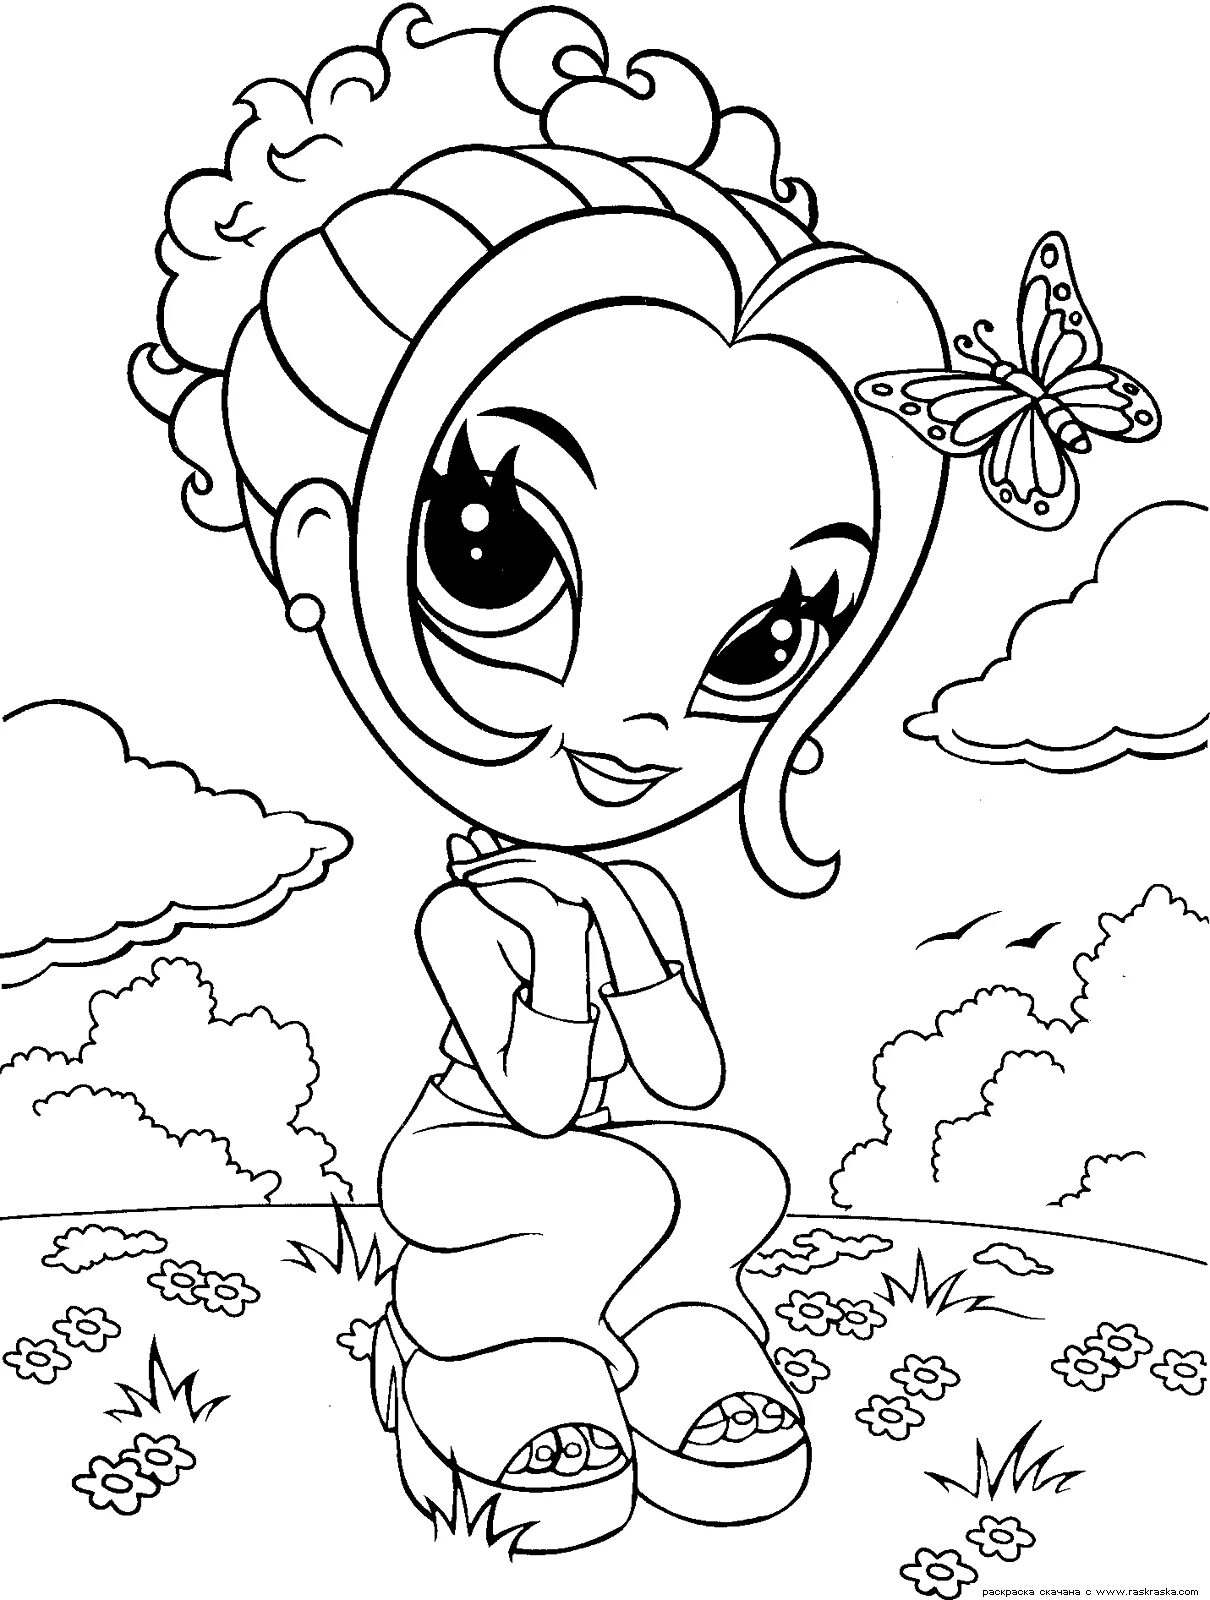 Innovative coloring book find for girls